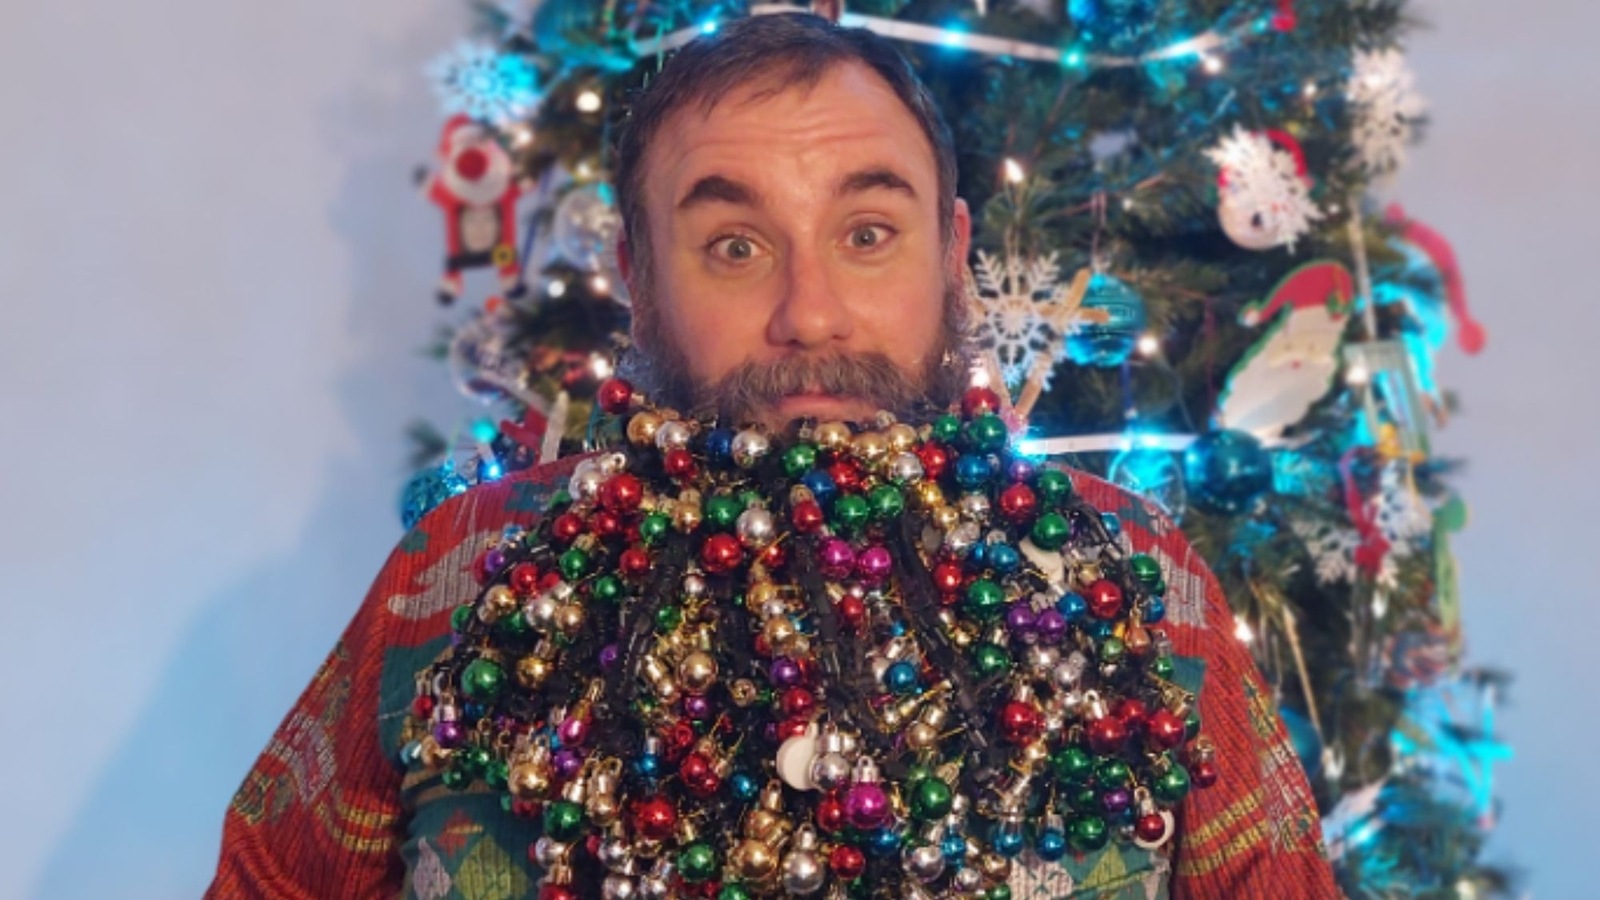 Beard Baubles, Tiny Christmas Ornaments That Men Can Hang From